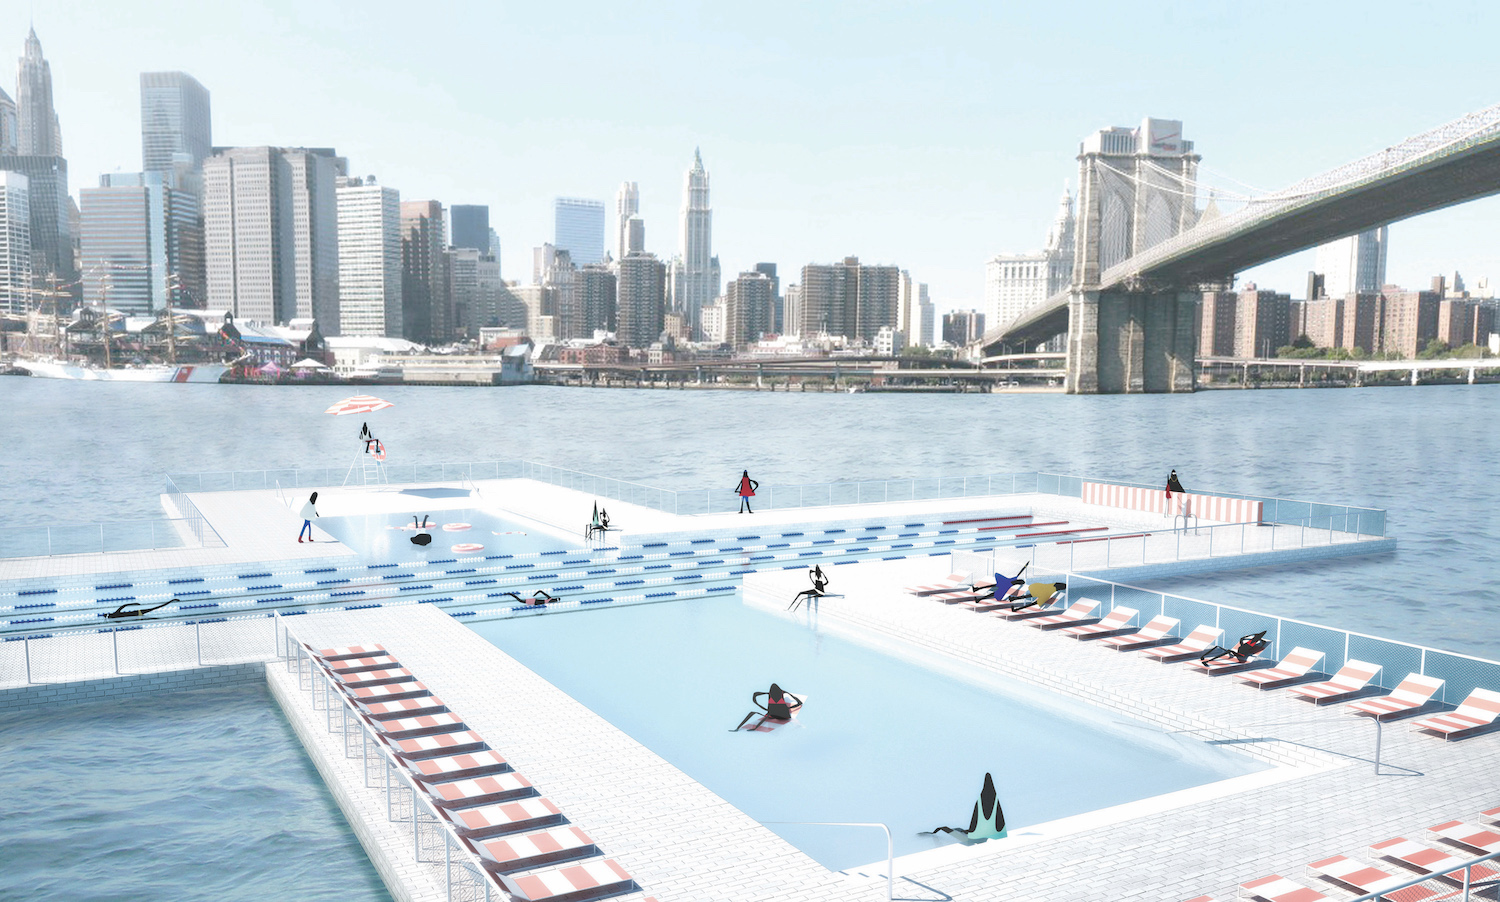 Digital rendering of the Plus Pool with people in it against the city skyline